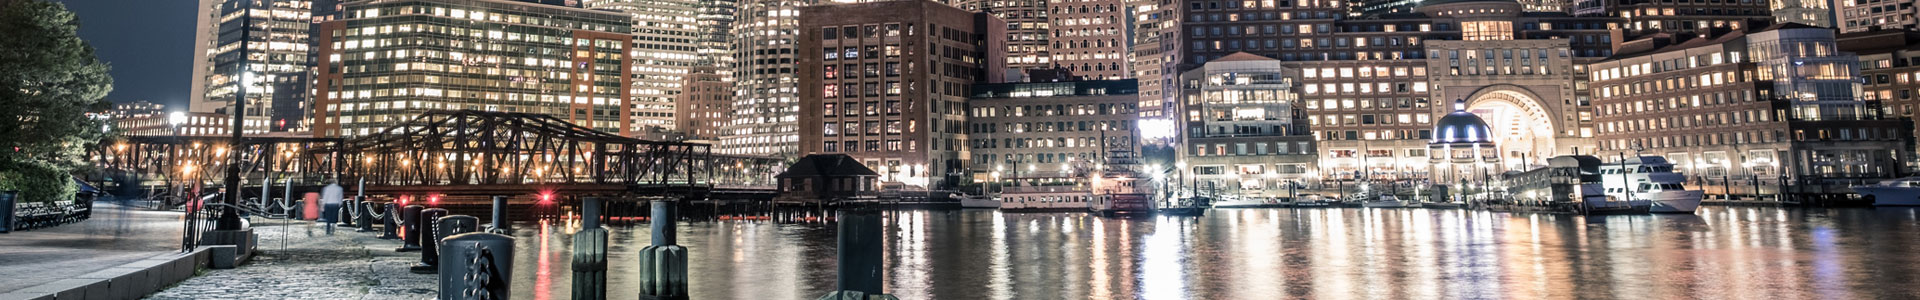 Rowes Wharf at night